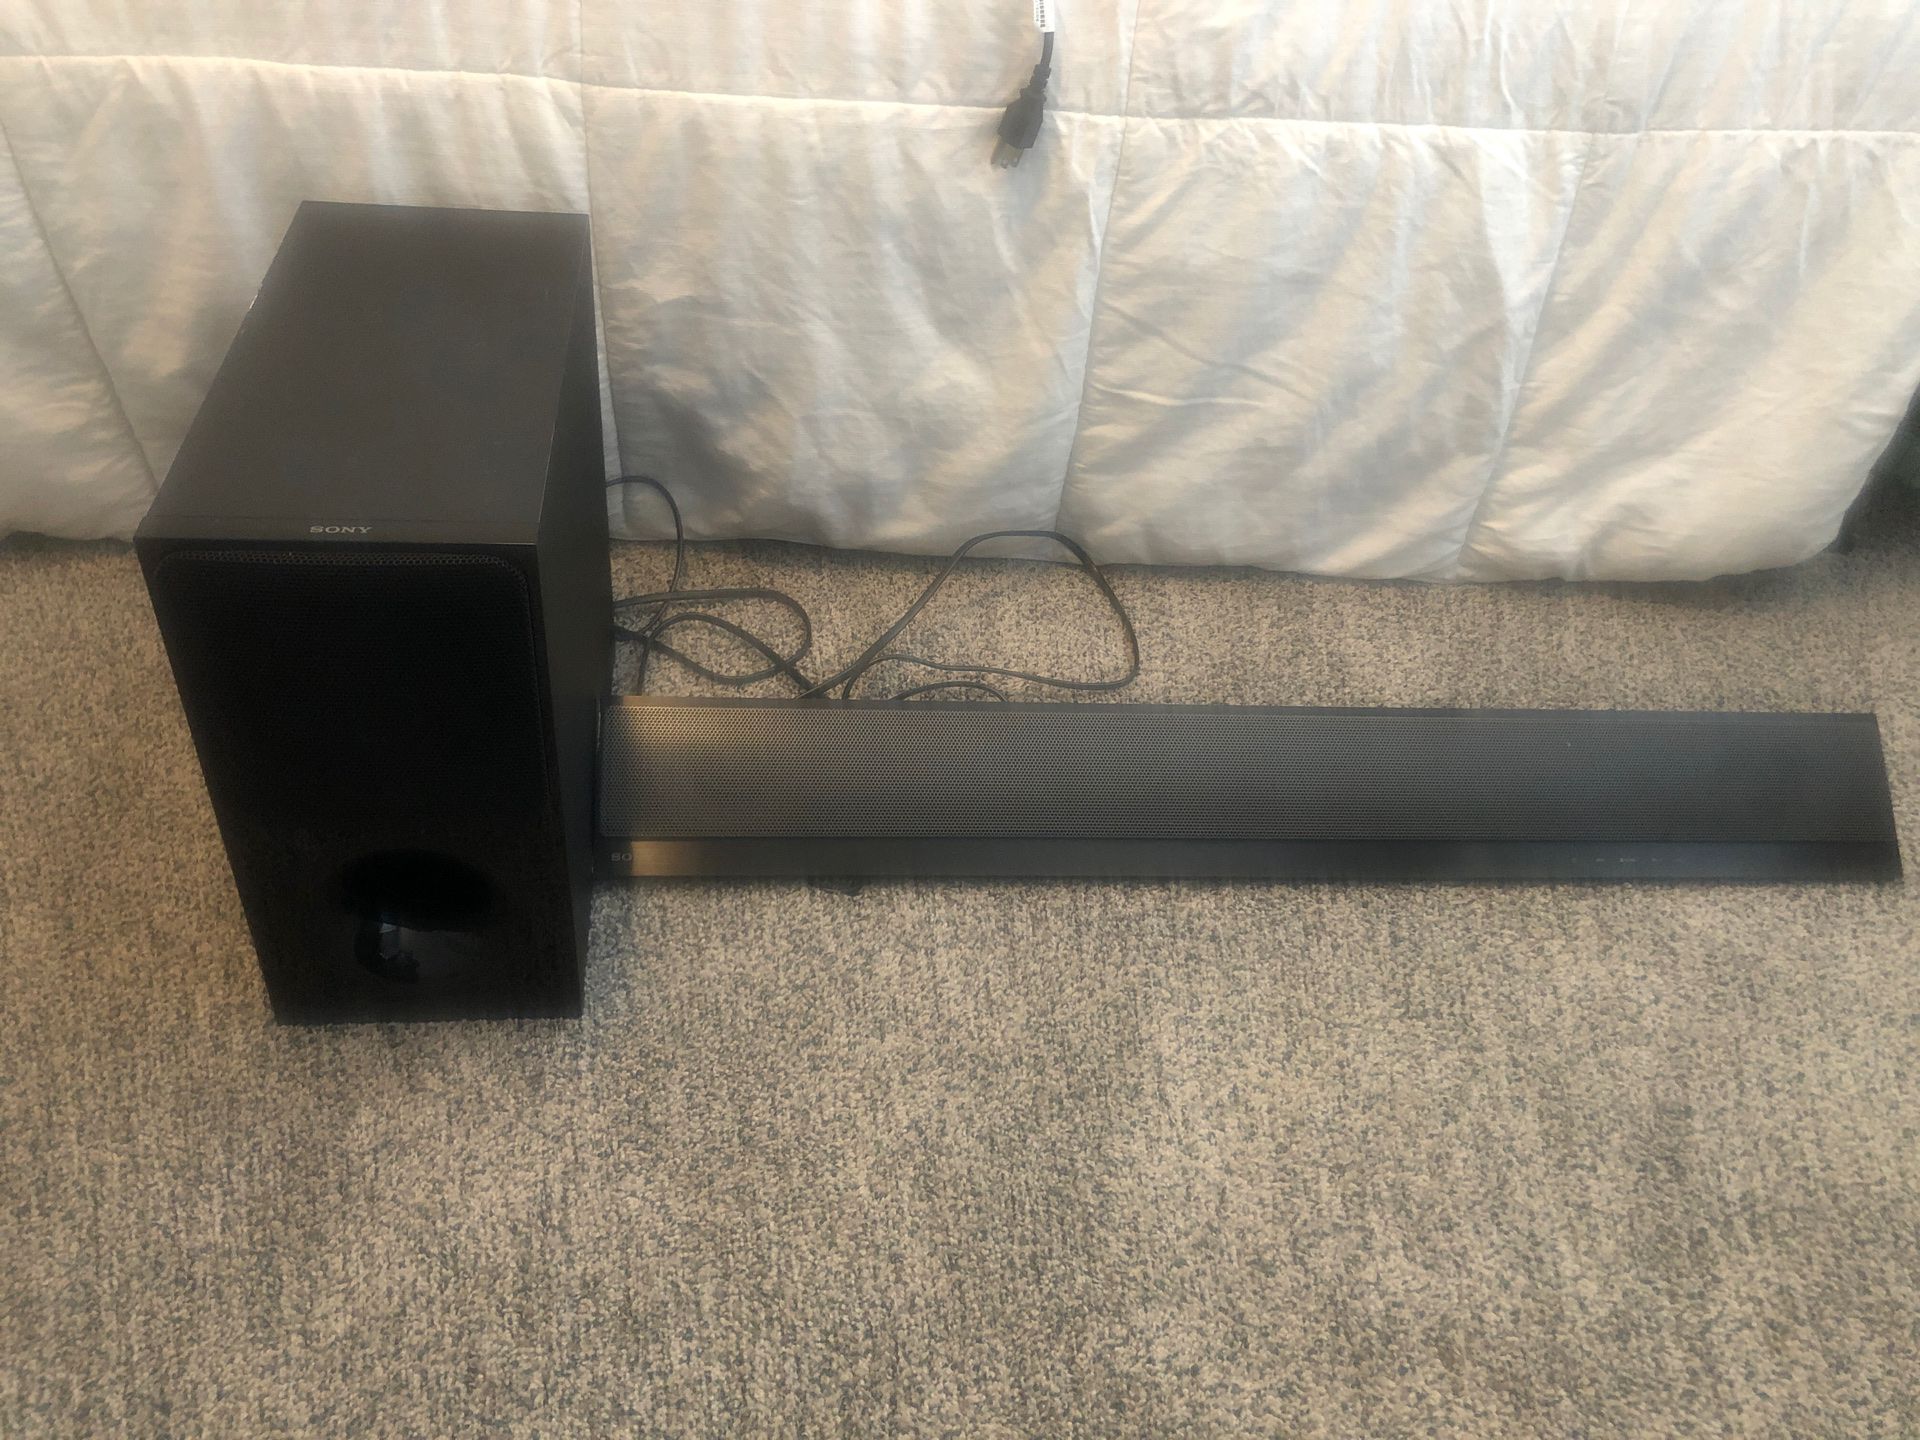 Sony sound bar and subwoofer